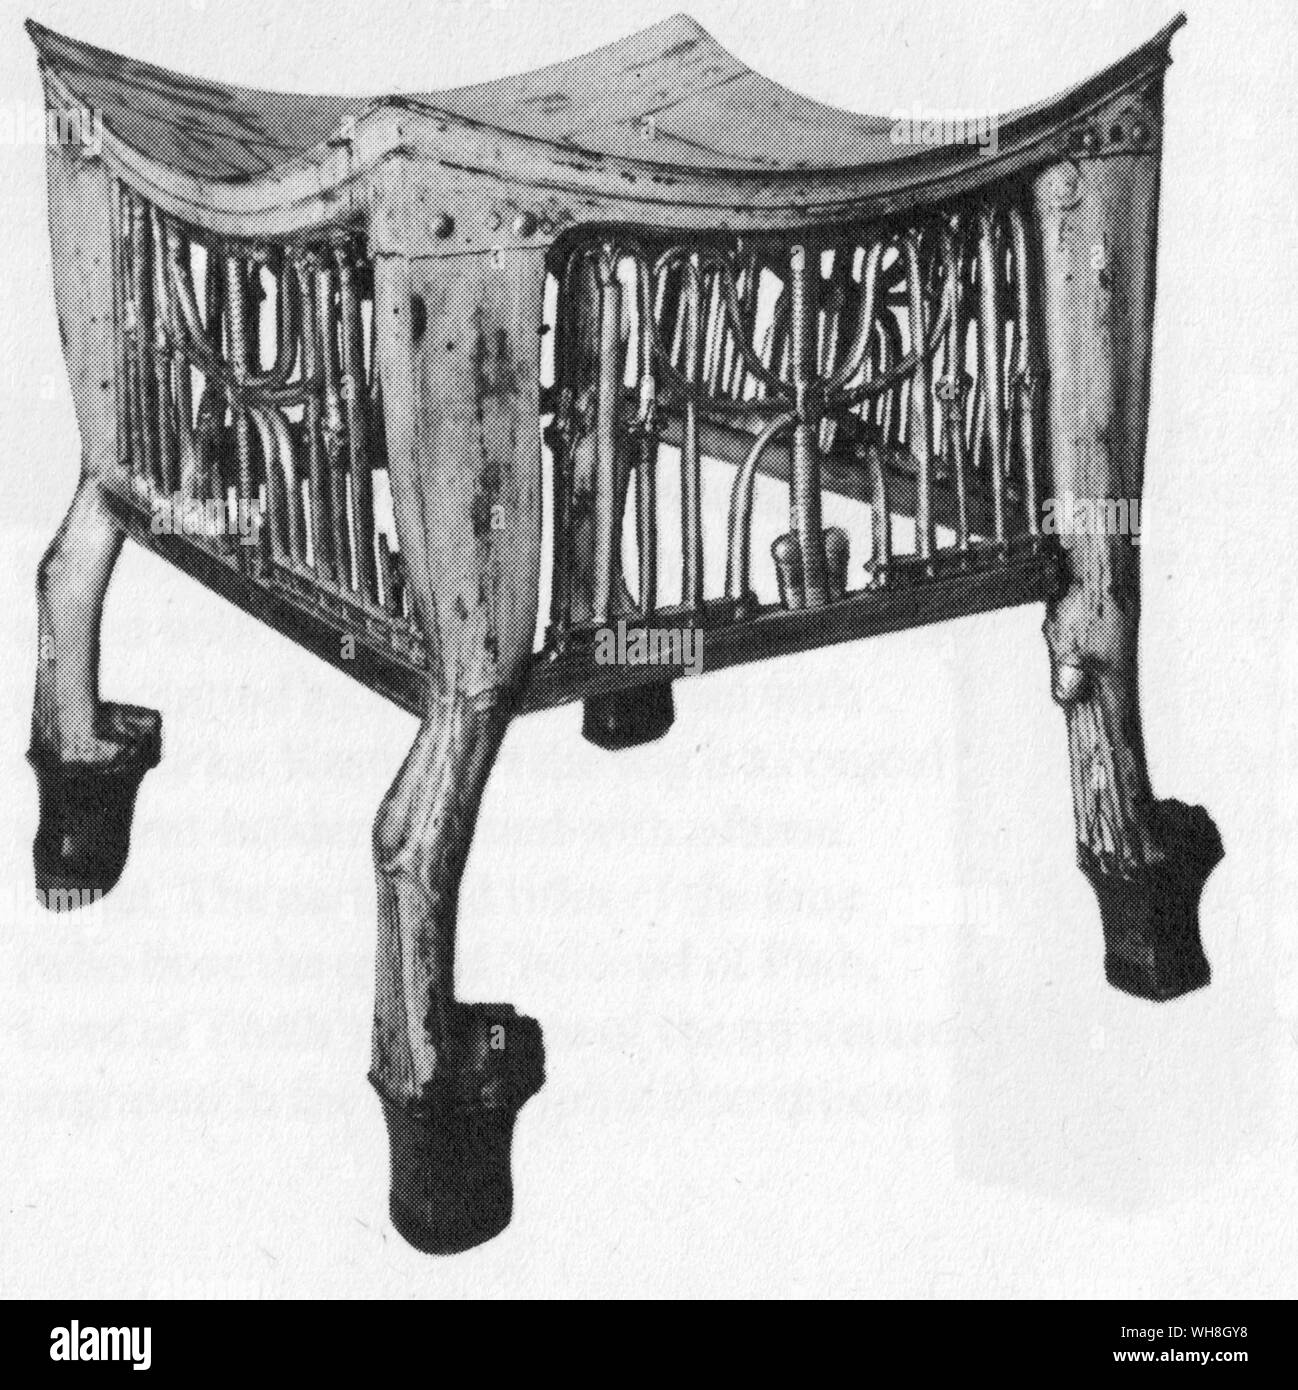 Ornate stool found in Tutankhamun's tomb. The Treasures of Tutankhamen, The Exhibition Catalogue by I E S Edwards, page 101.. The feet, in form of a member of the cat family's paws, are of wood painted white. Between them can be observed a gilded motif of the Union of the Two Countries in openwork wood, taking the form of lilies and papyruses entwined around the hieroglyphic sign signifying union. A cushion must have been placed on the curved seat. Stock Photo